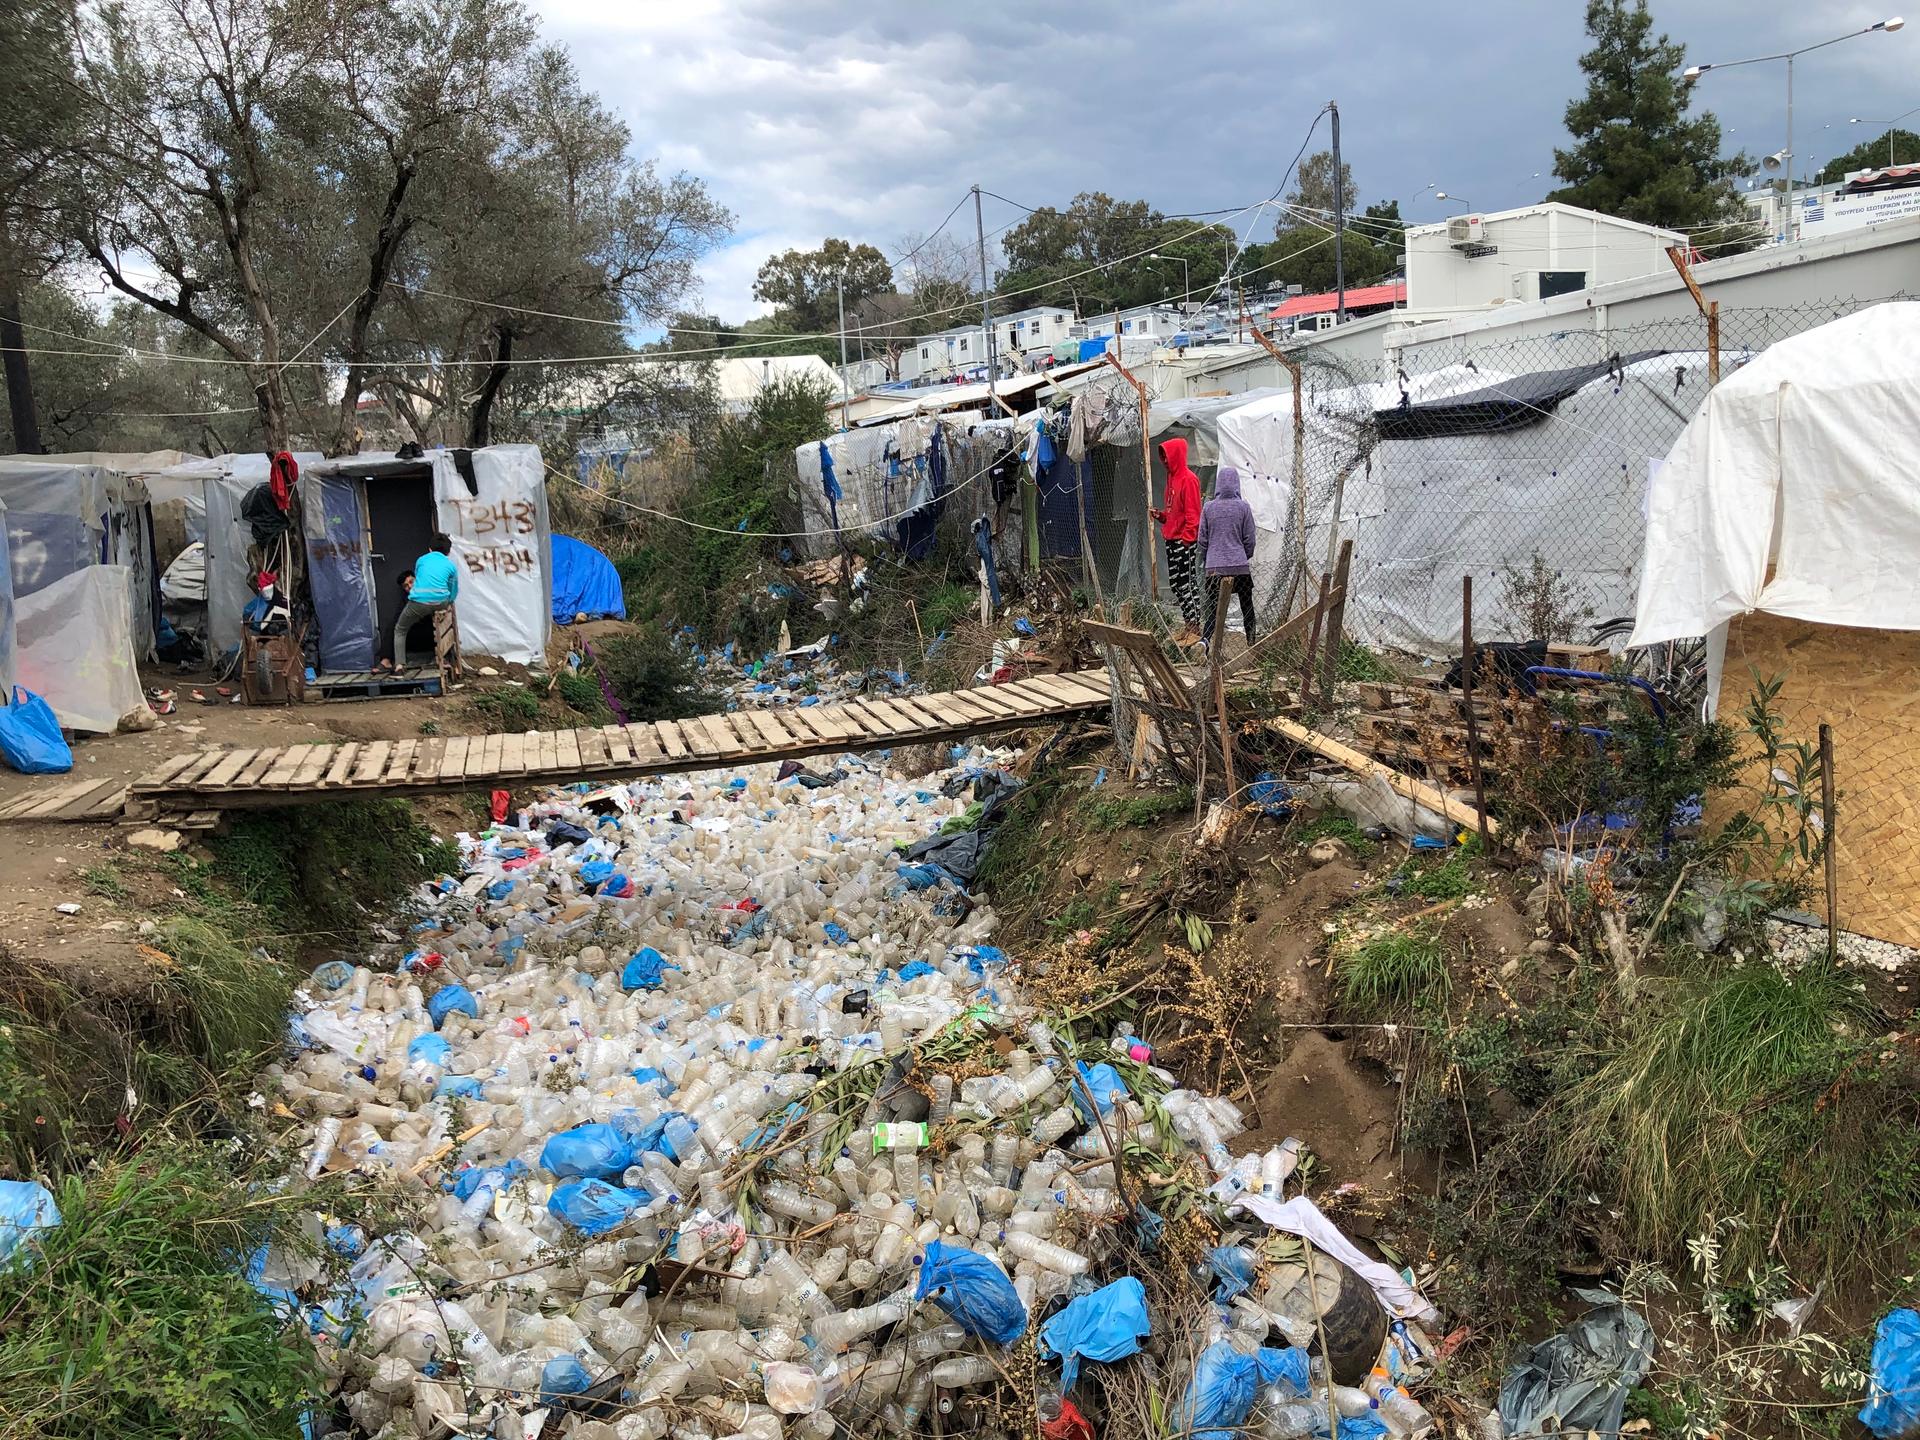 Garbage is strewn between tents in Moria, an overcrowded refugee camp on the Greek island of Lesbos.